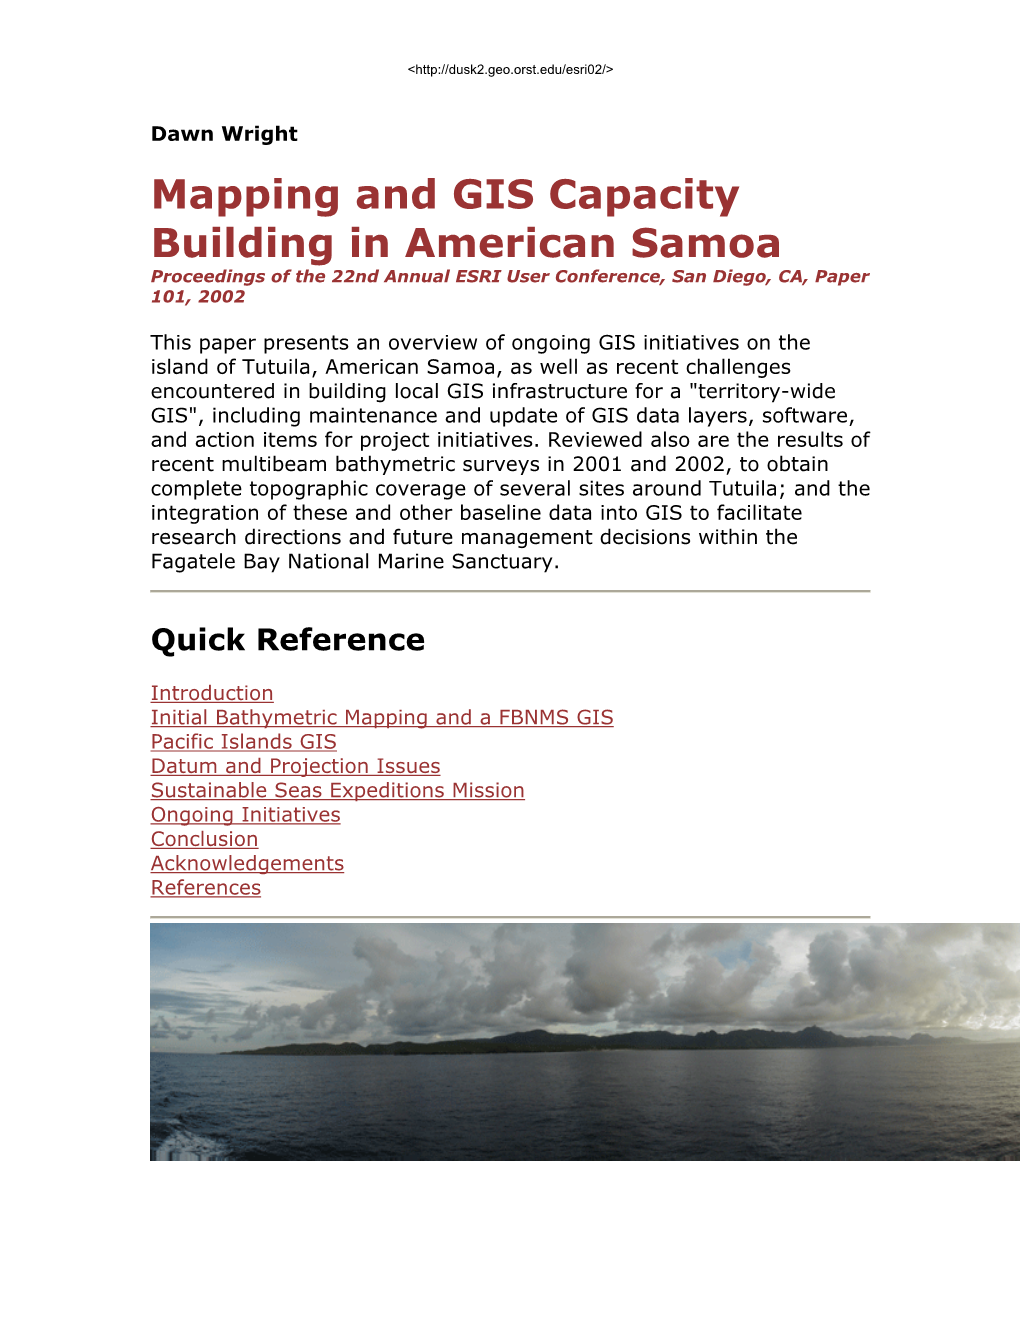 Mapping and GIS Capacity Building in American Samoa Proceedings of the 22Nd Annual ESRI User Conference, San Diego, CA, Paper 101, 2002